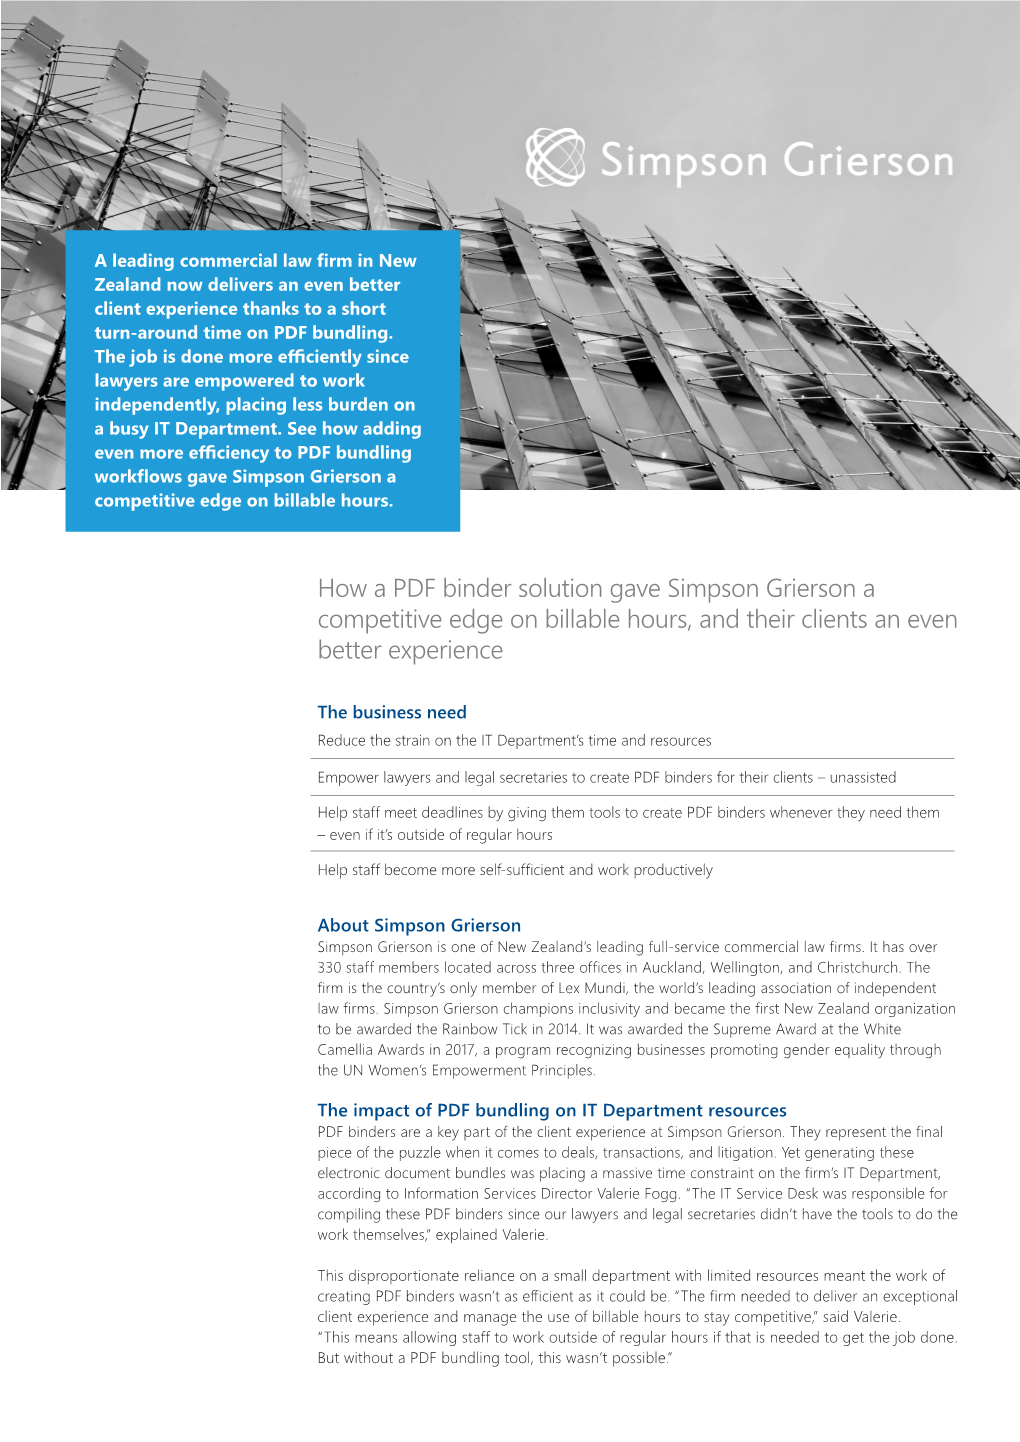 How a PDF Binder Solution Gave Simpson Grierson a Competitive Edge on Billable Hours, and Their Clients an Even Better Experience